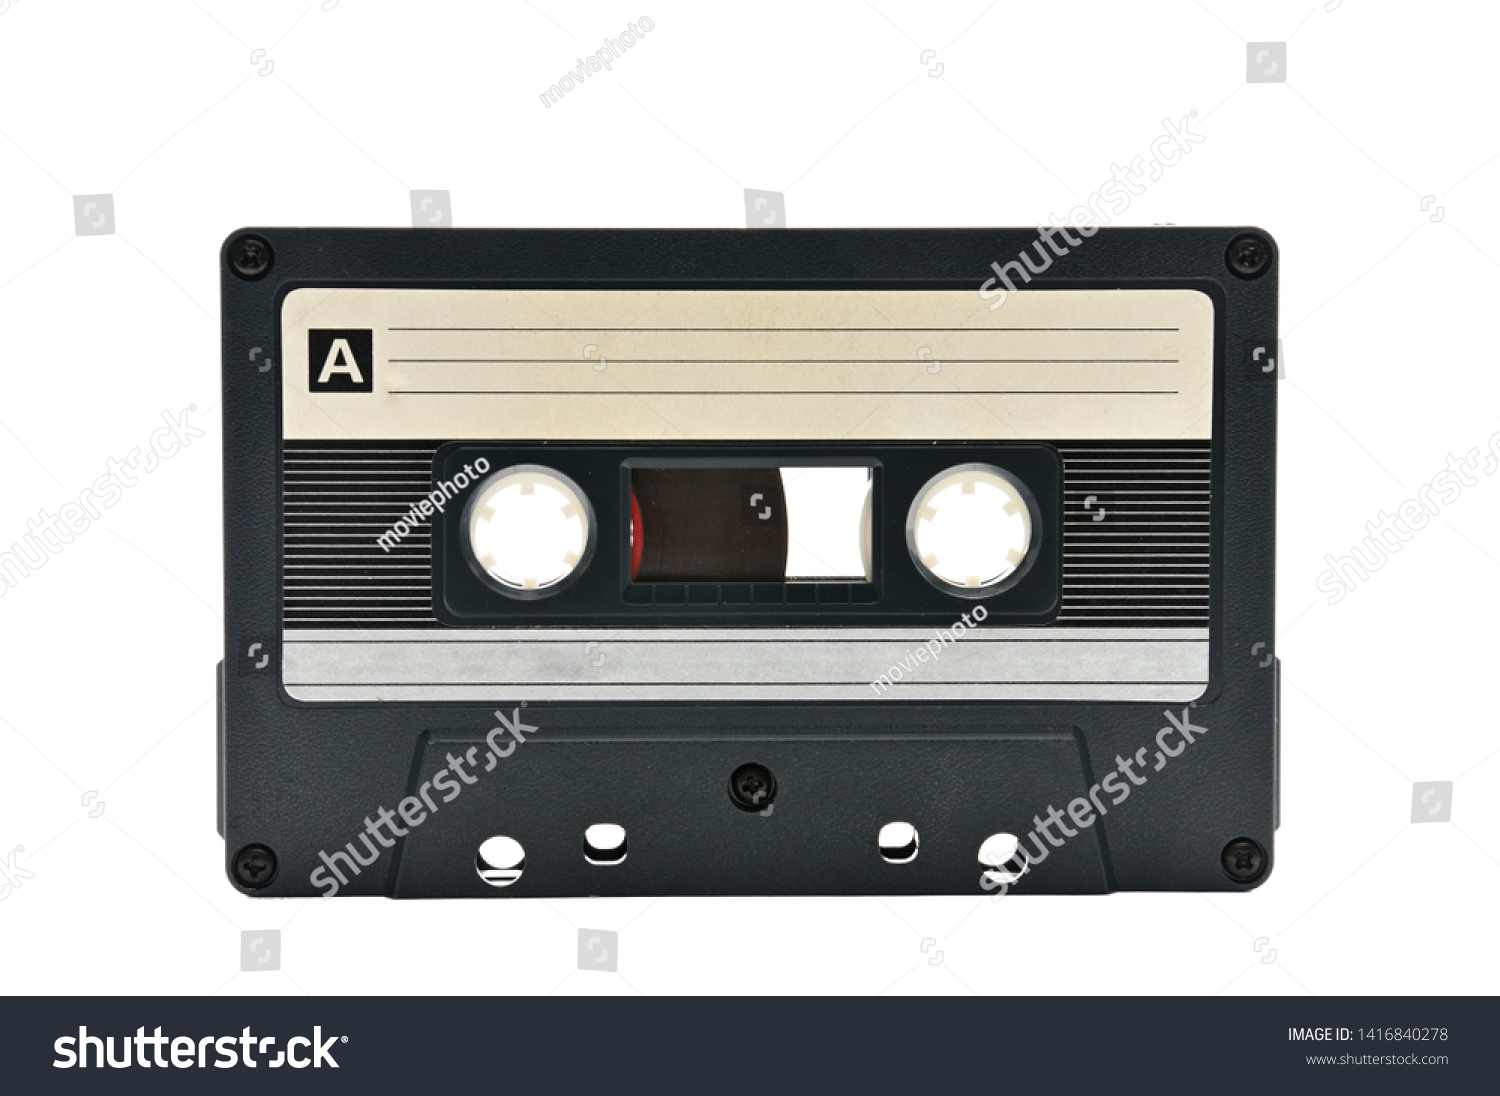 Compact audio cassette for use on audio tape recorders, music players and tape decks.Retro. #1416840278